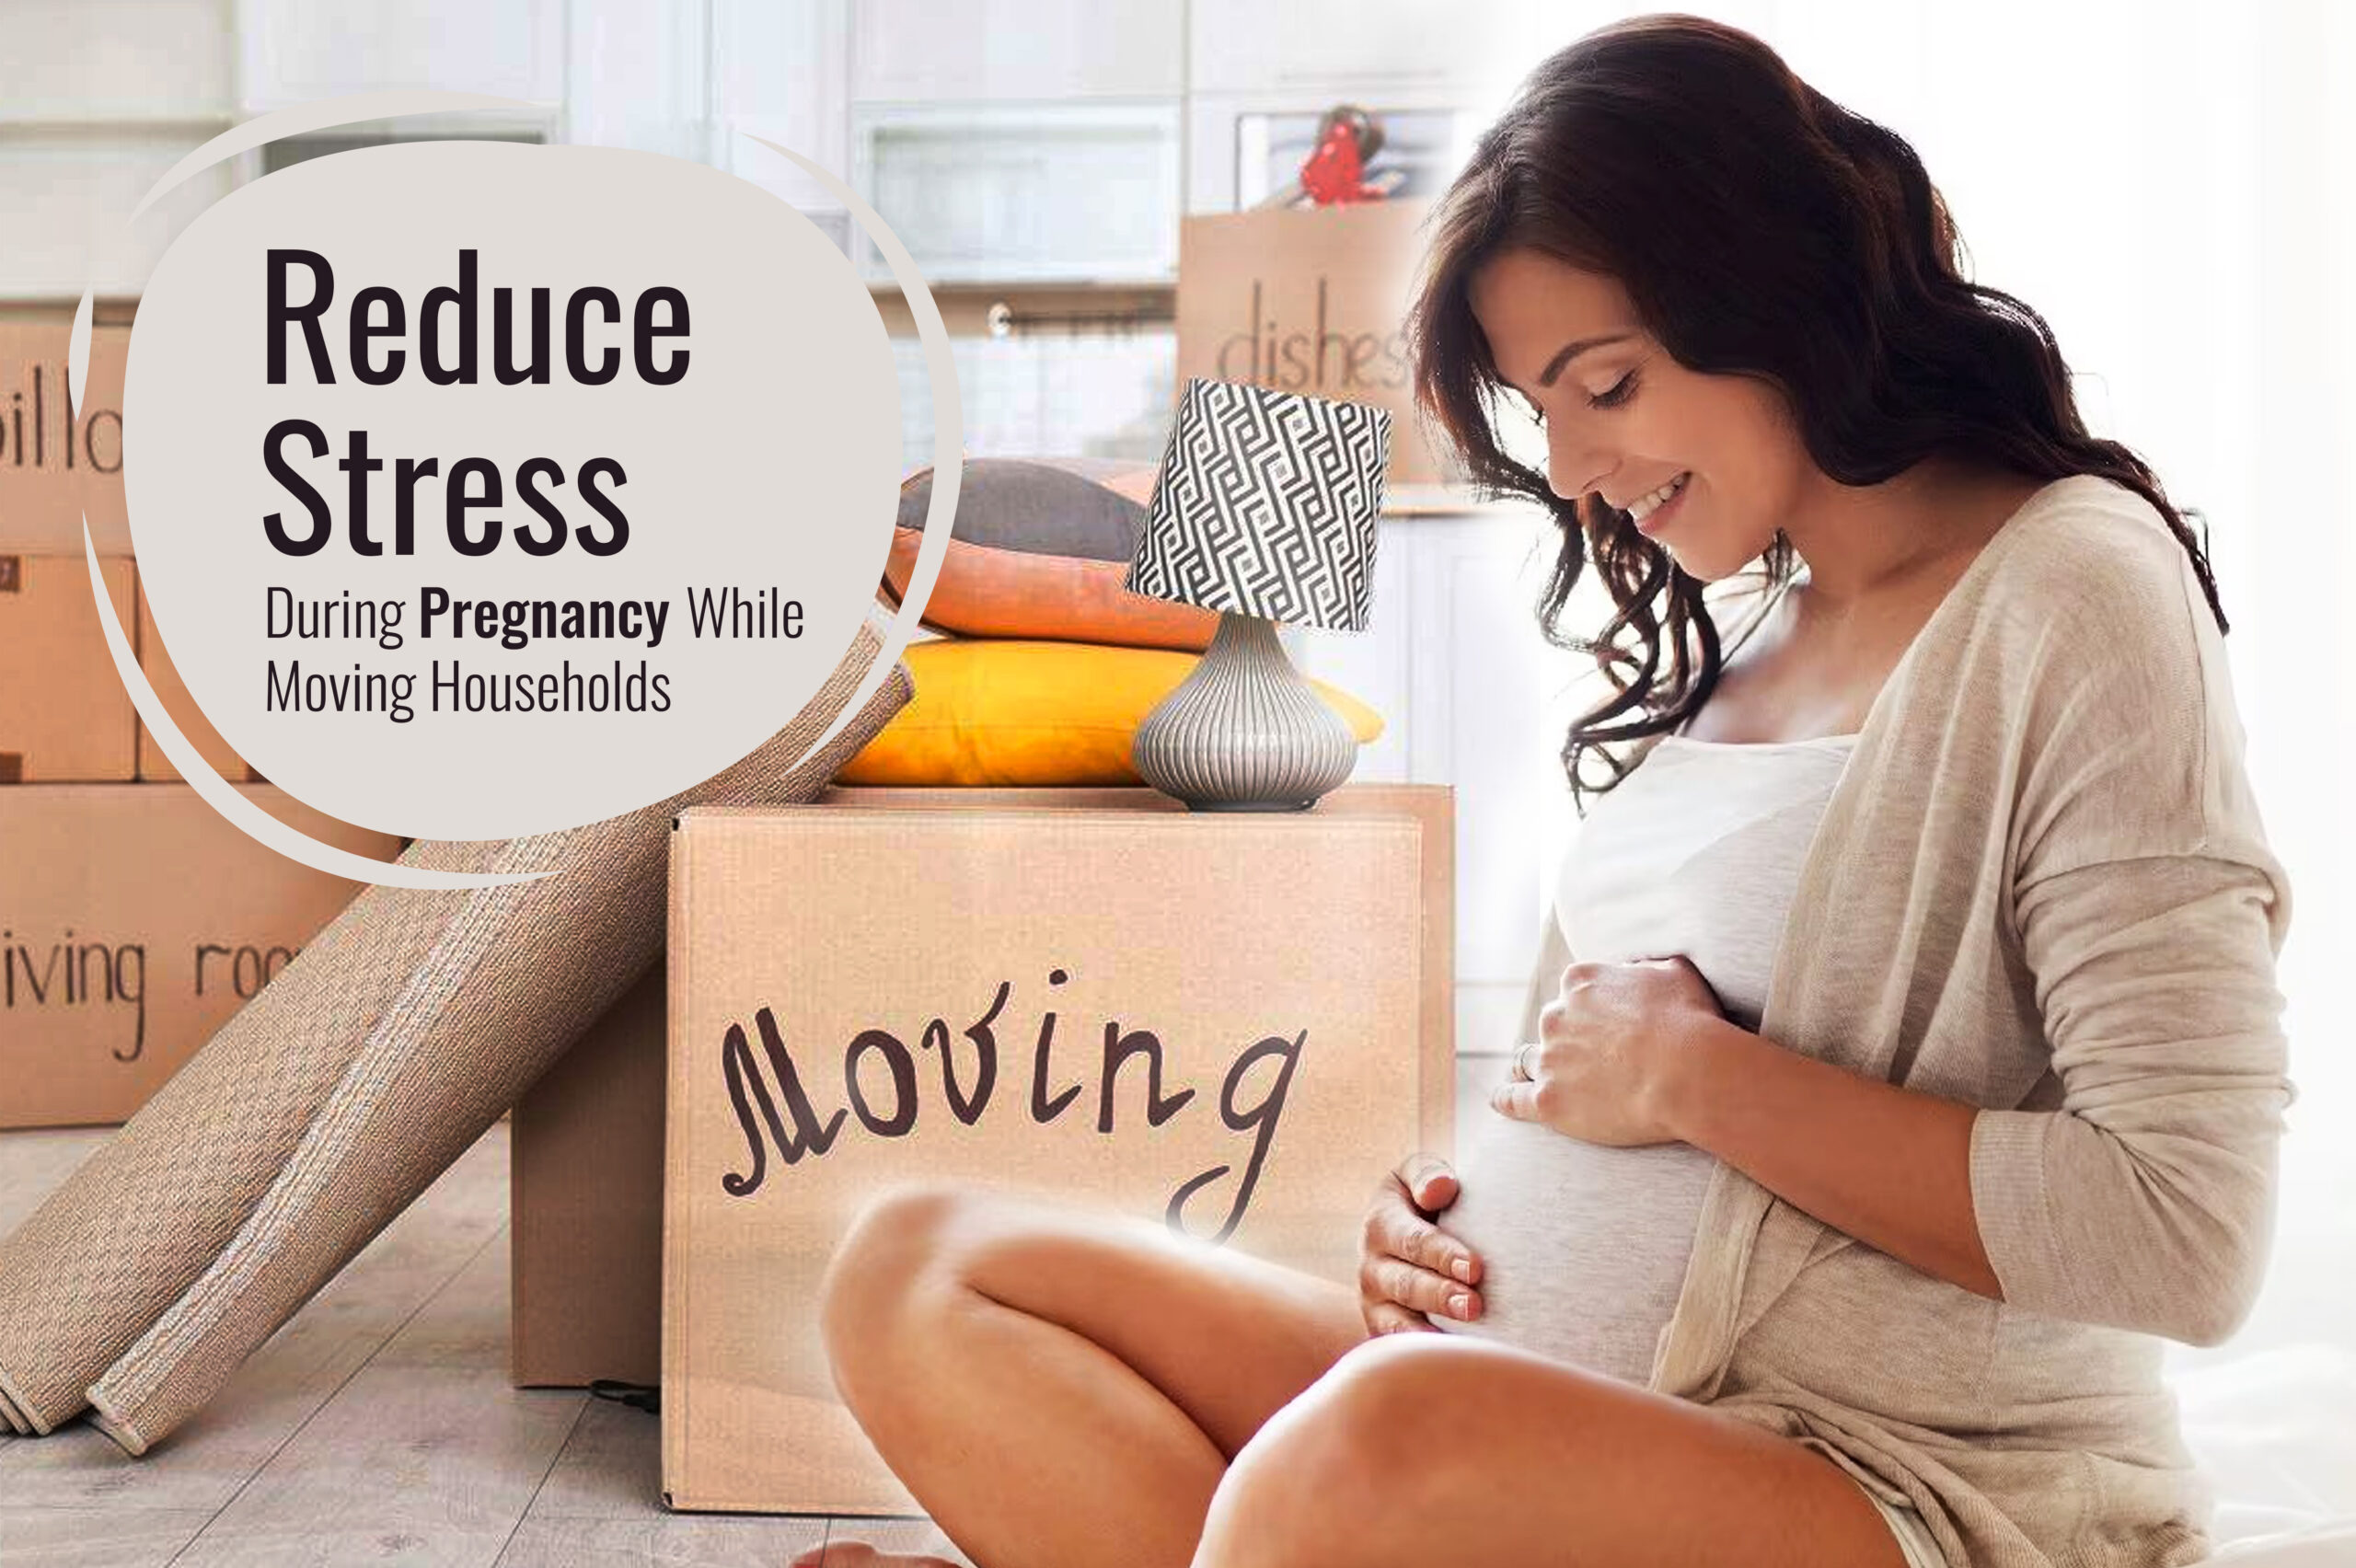 Reduce-Stress-During-Pregnancy-While-Moving-Households